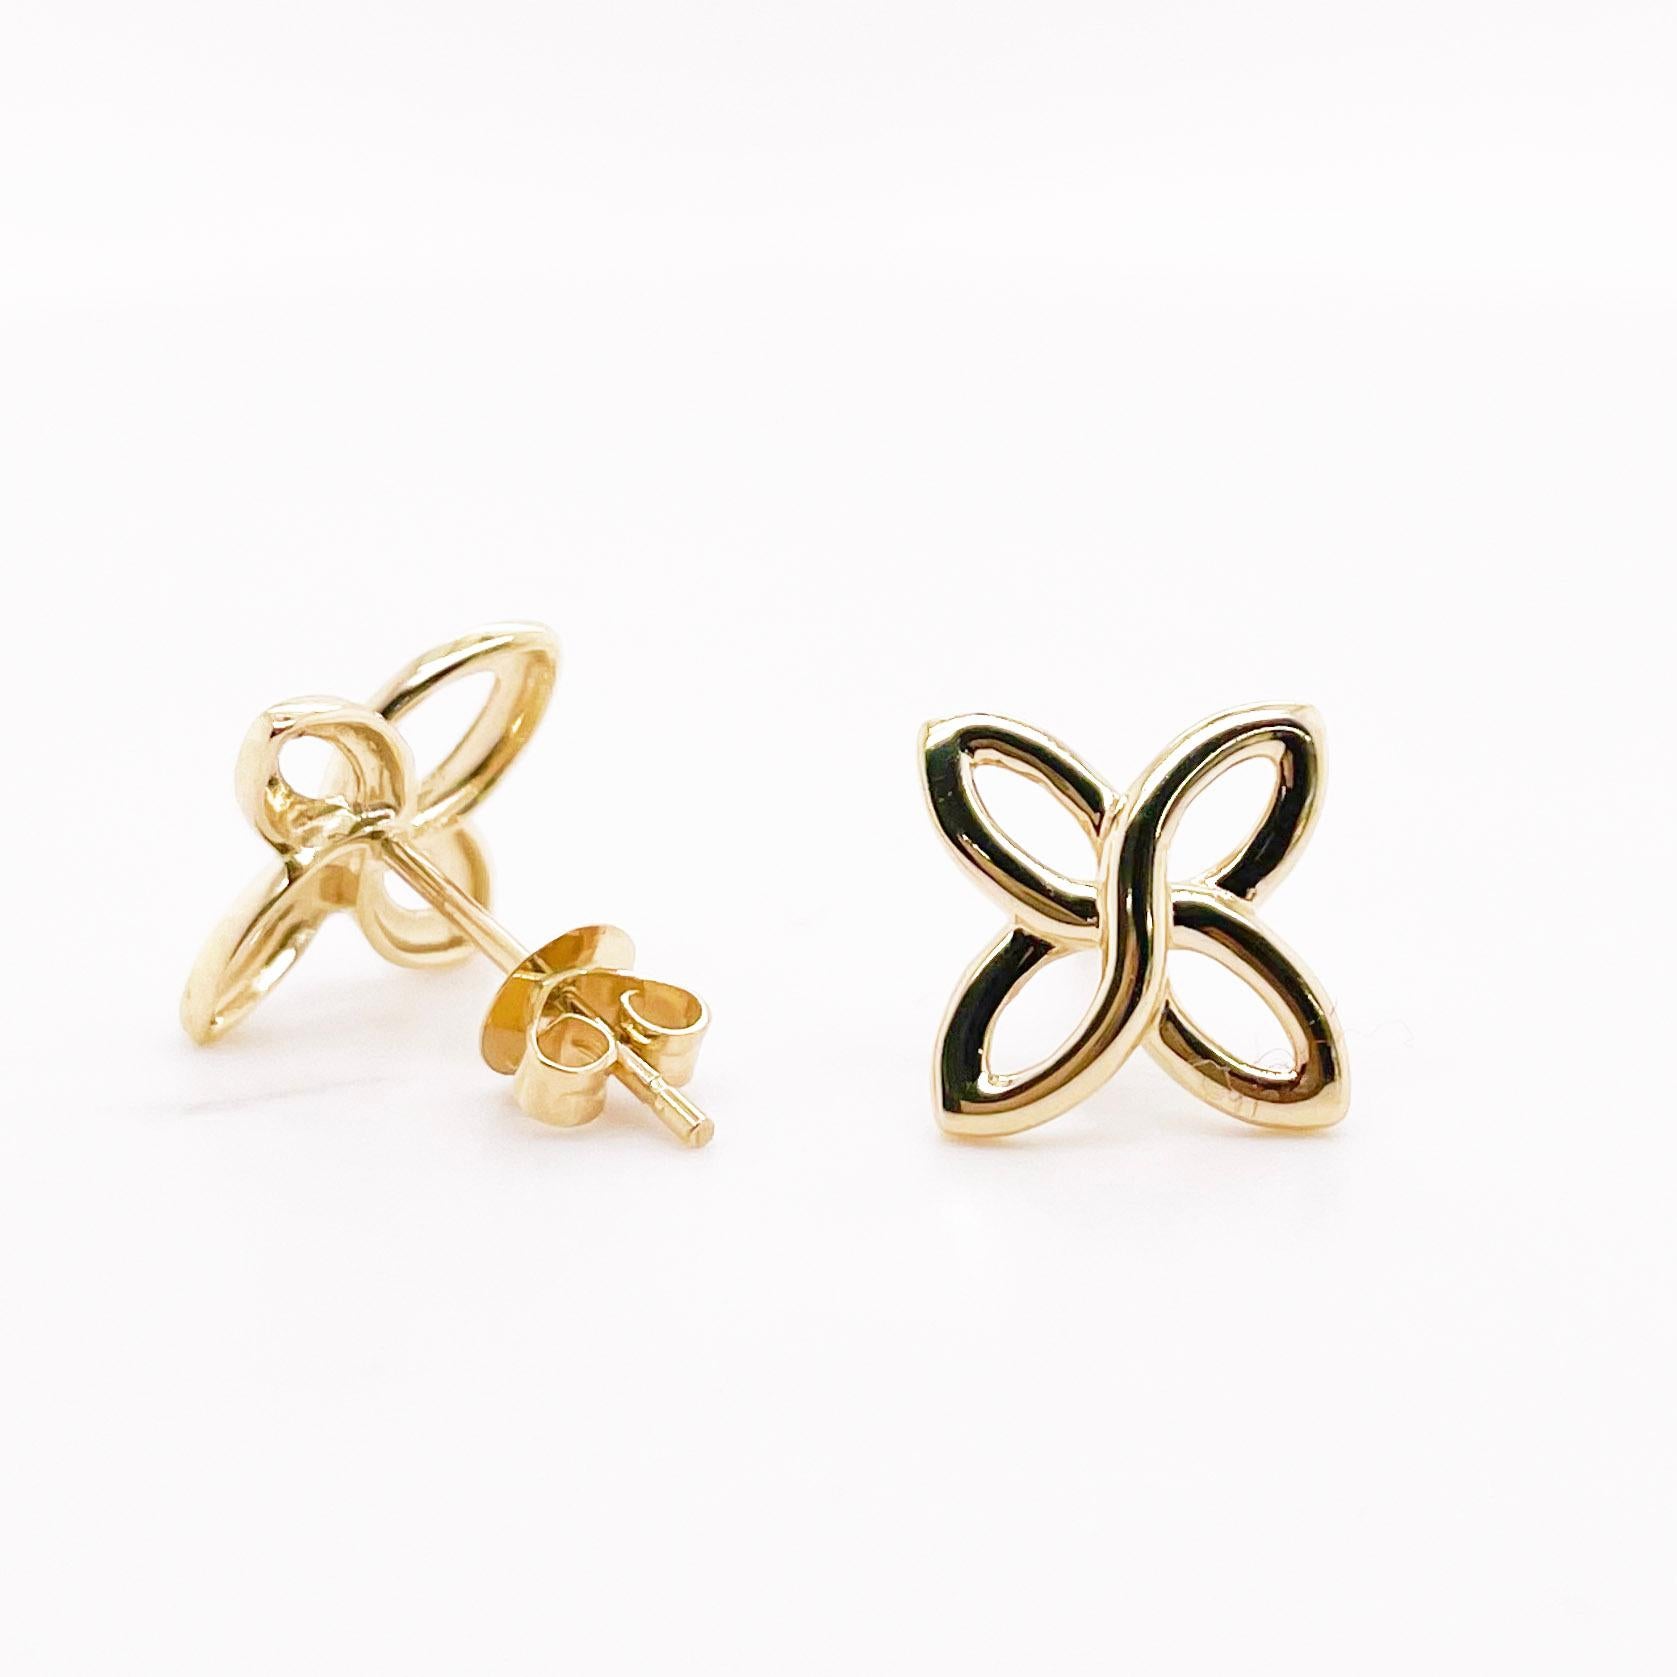 These dainty earrings are so cut with their quatrefoil or clover shape. They look perfect for everyday use and are perfect for sensitive ears! The details for these gorgeous earrings are listed below:
1 Set
Metal Quality: 14K Yellow Gold
Earring